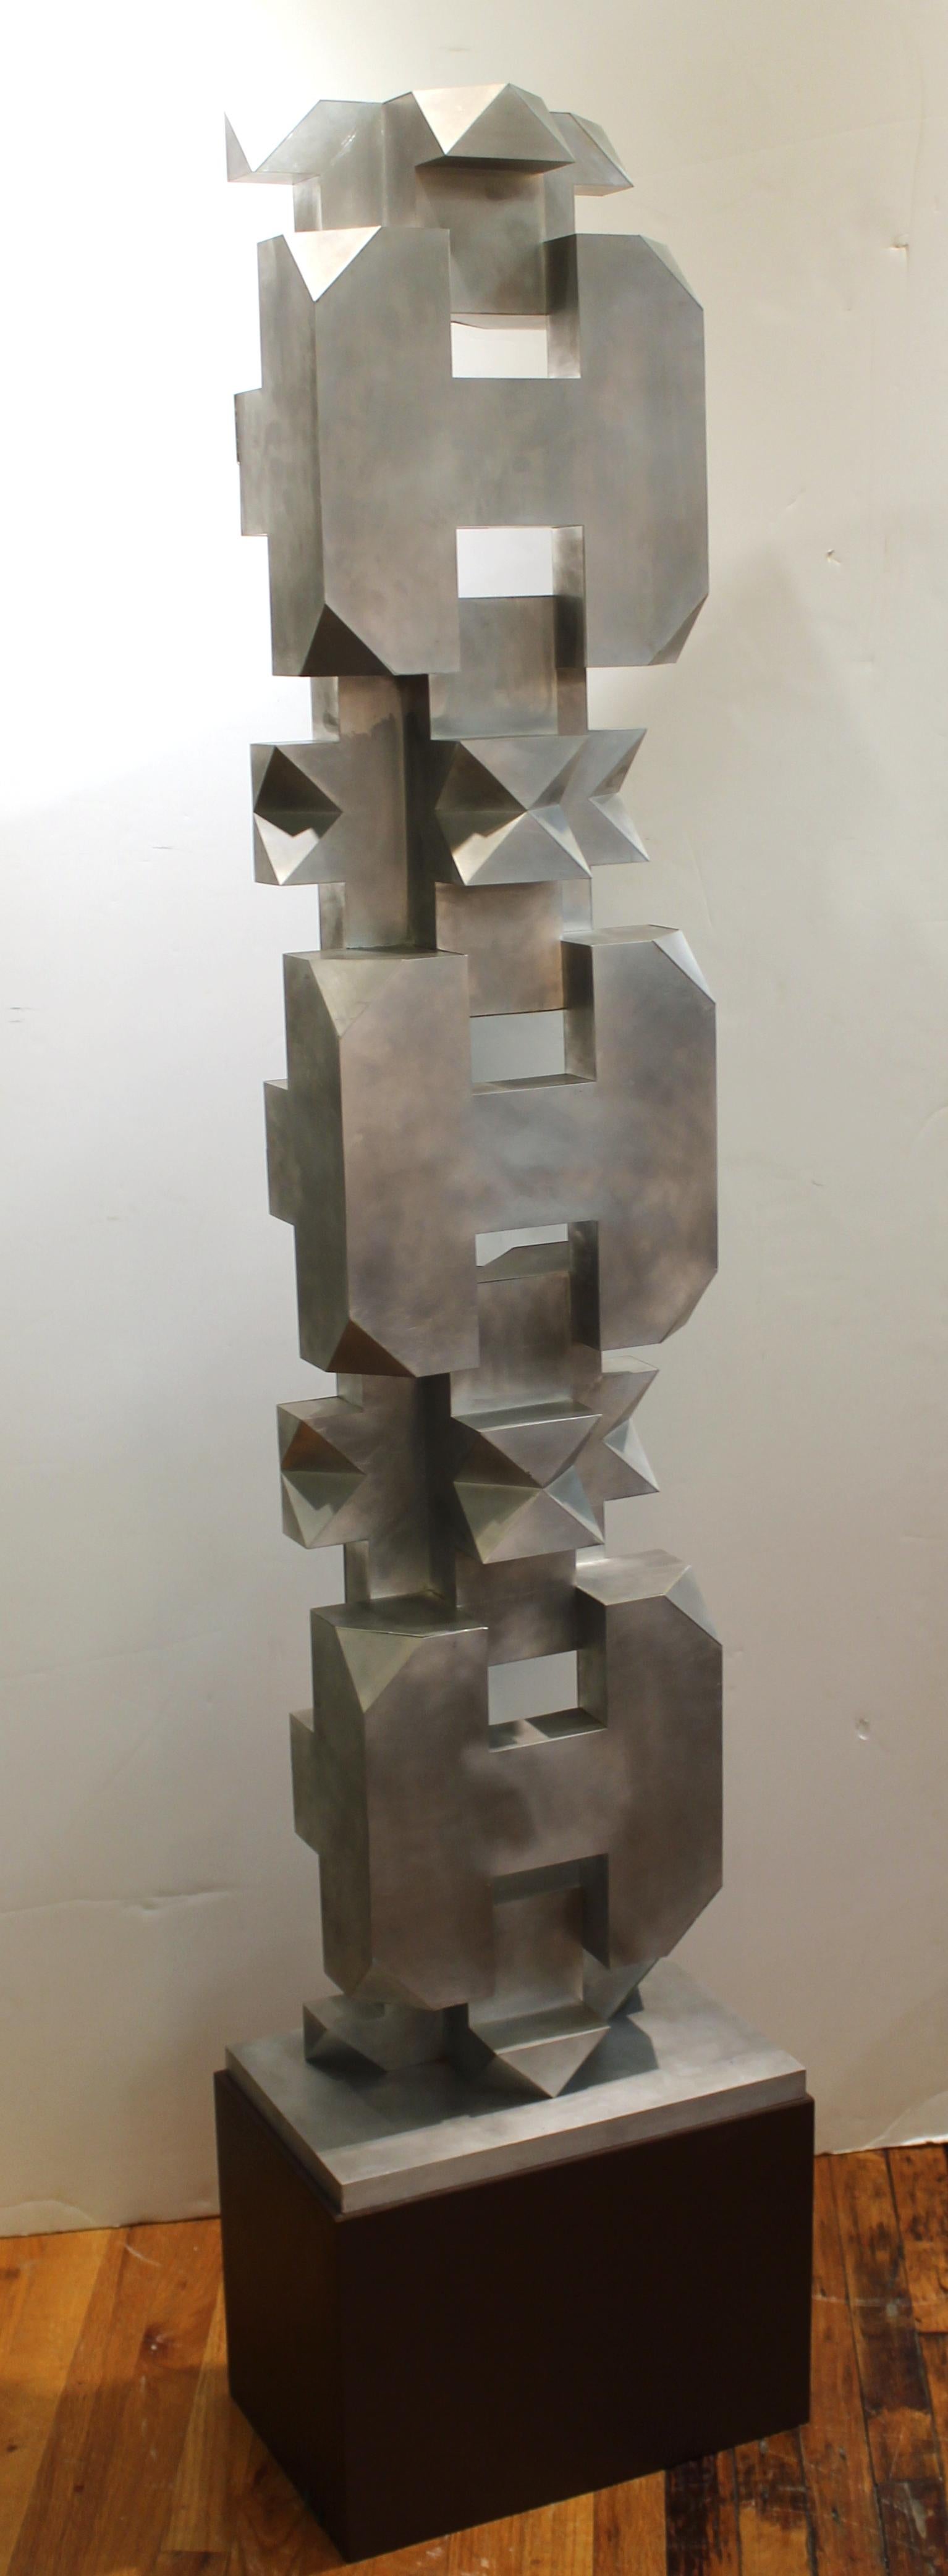 Late 20th Century Isaac Kahn Signed Geometric TOTEM in Metal on Base